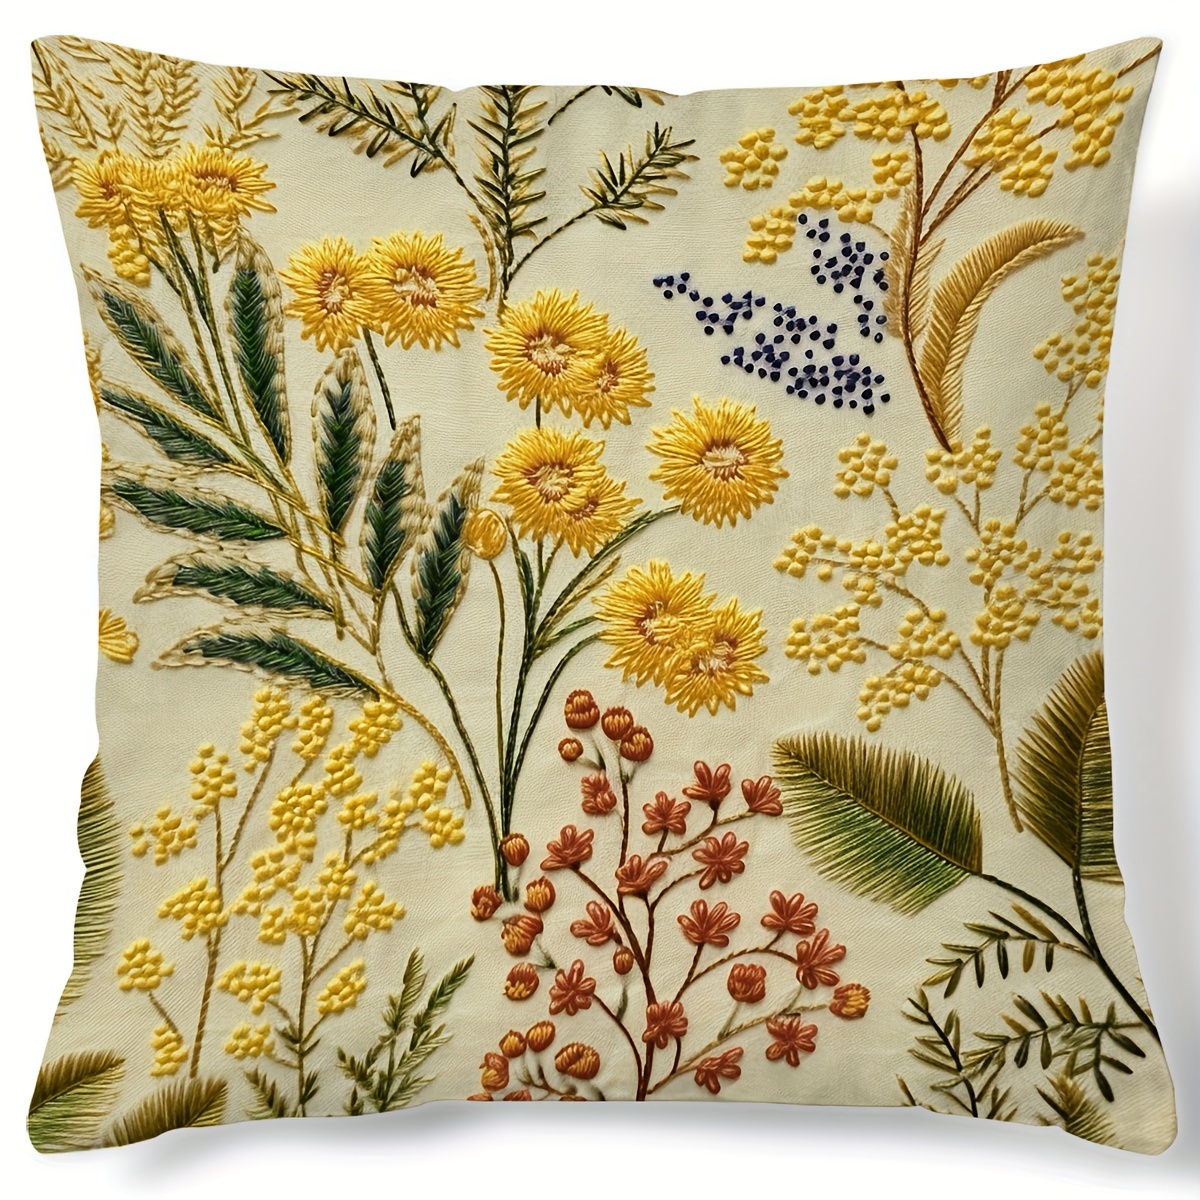 

1pc, 45cm/17.7inch, Contemporary Style Botanical Floral Pattern Digital Print Cushion Cover, Decorative Throw Pillow Case For Home Decor, Beige With Yellow Flowers